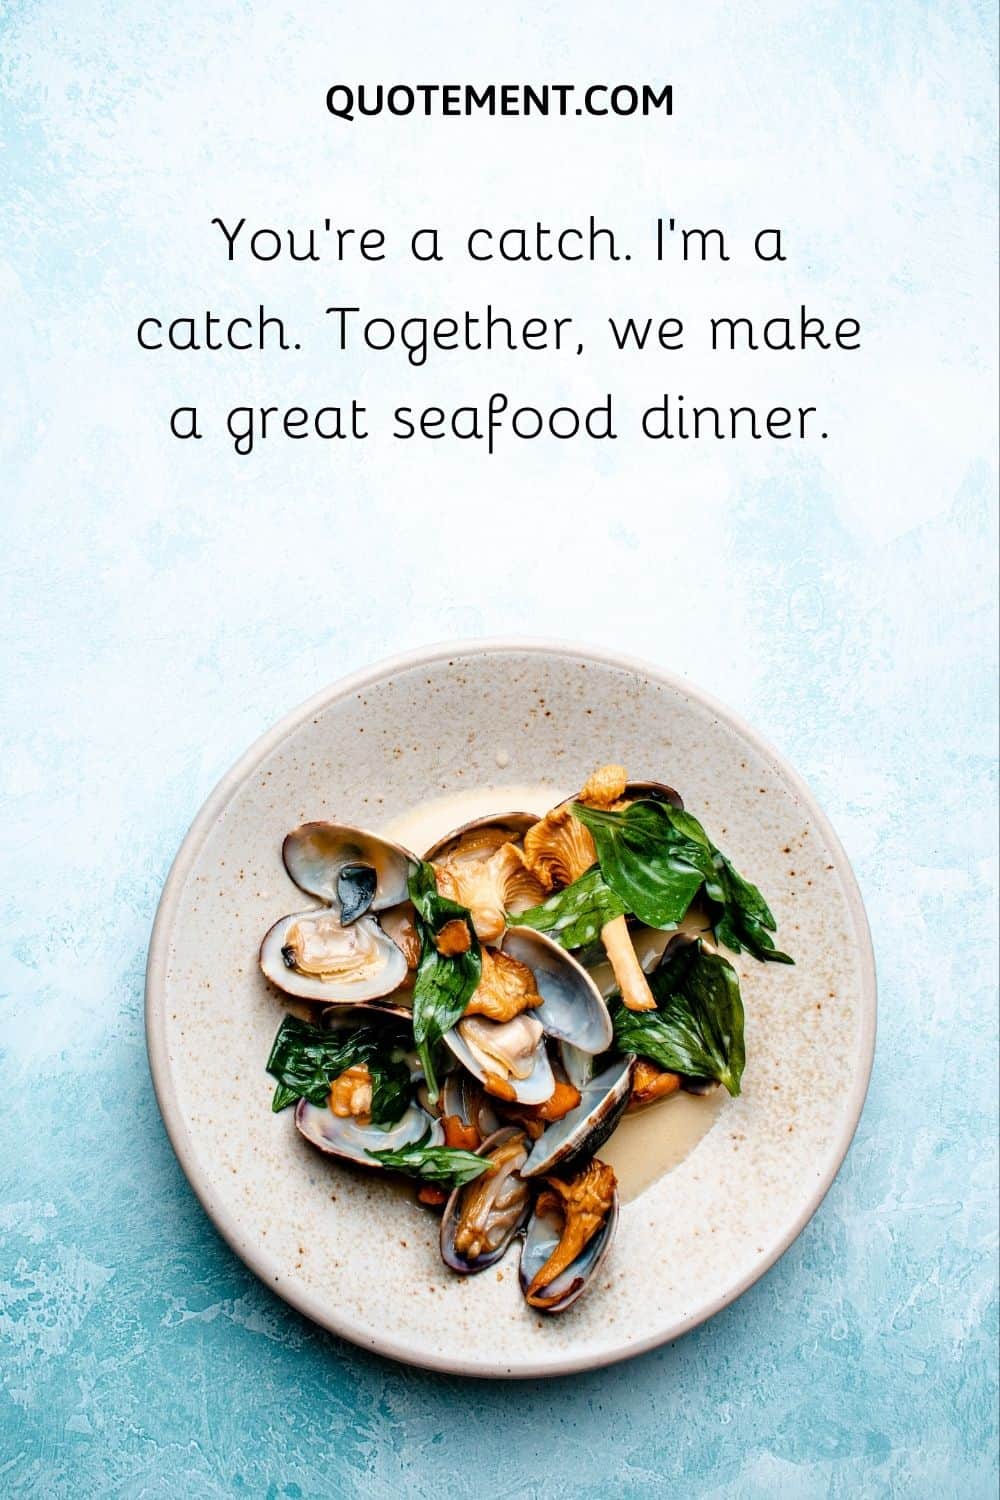 You’re a catch. I’m a catch. Together, we make a great seafood dinner.